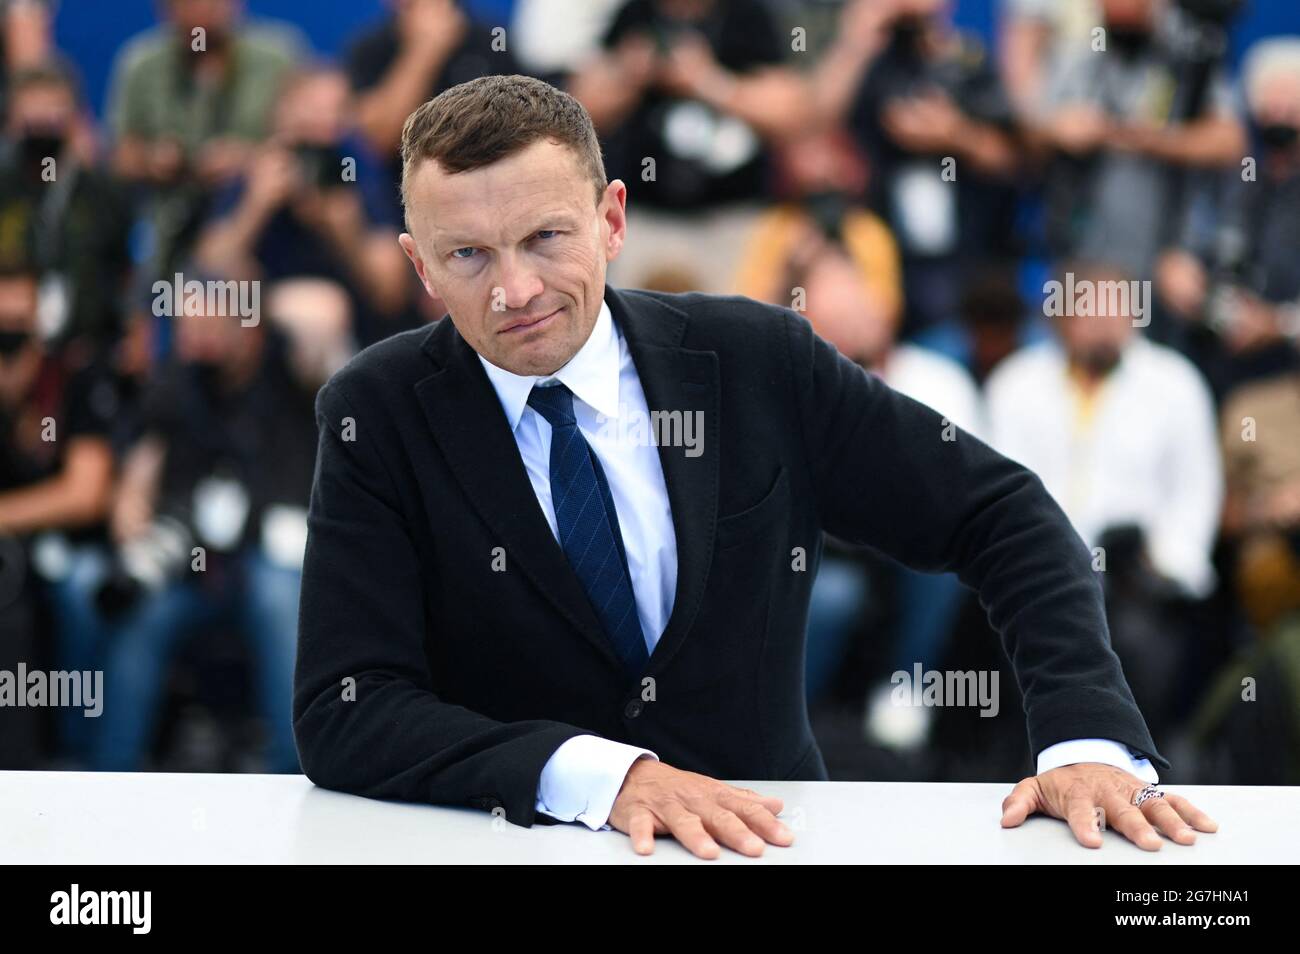 Sylvain Tesson attending the La Panthere Des Neiges Photocall as part of the 74th Cannes International Film Festival in Cannes, France on July 14, 2021. Photo by Aurore Marechal/ABACAPRESS.COM Stock Photo